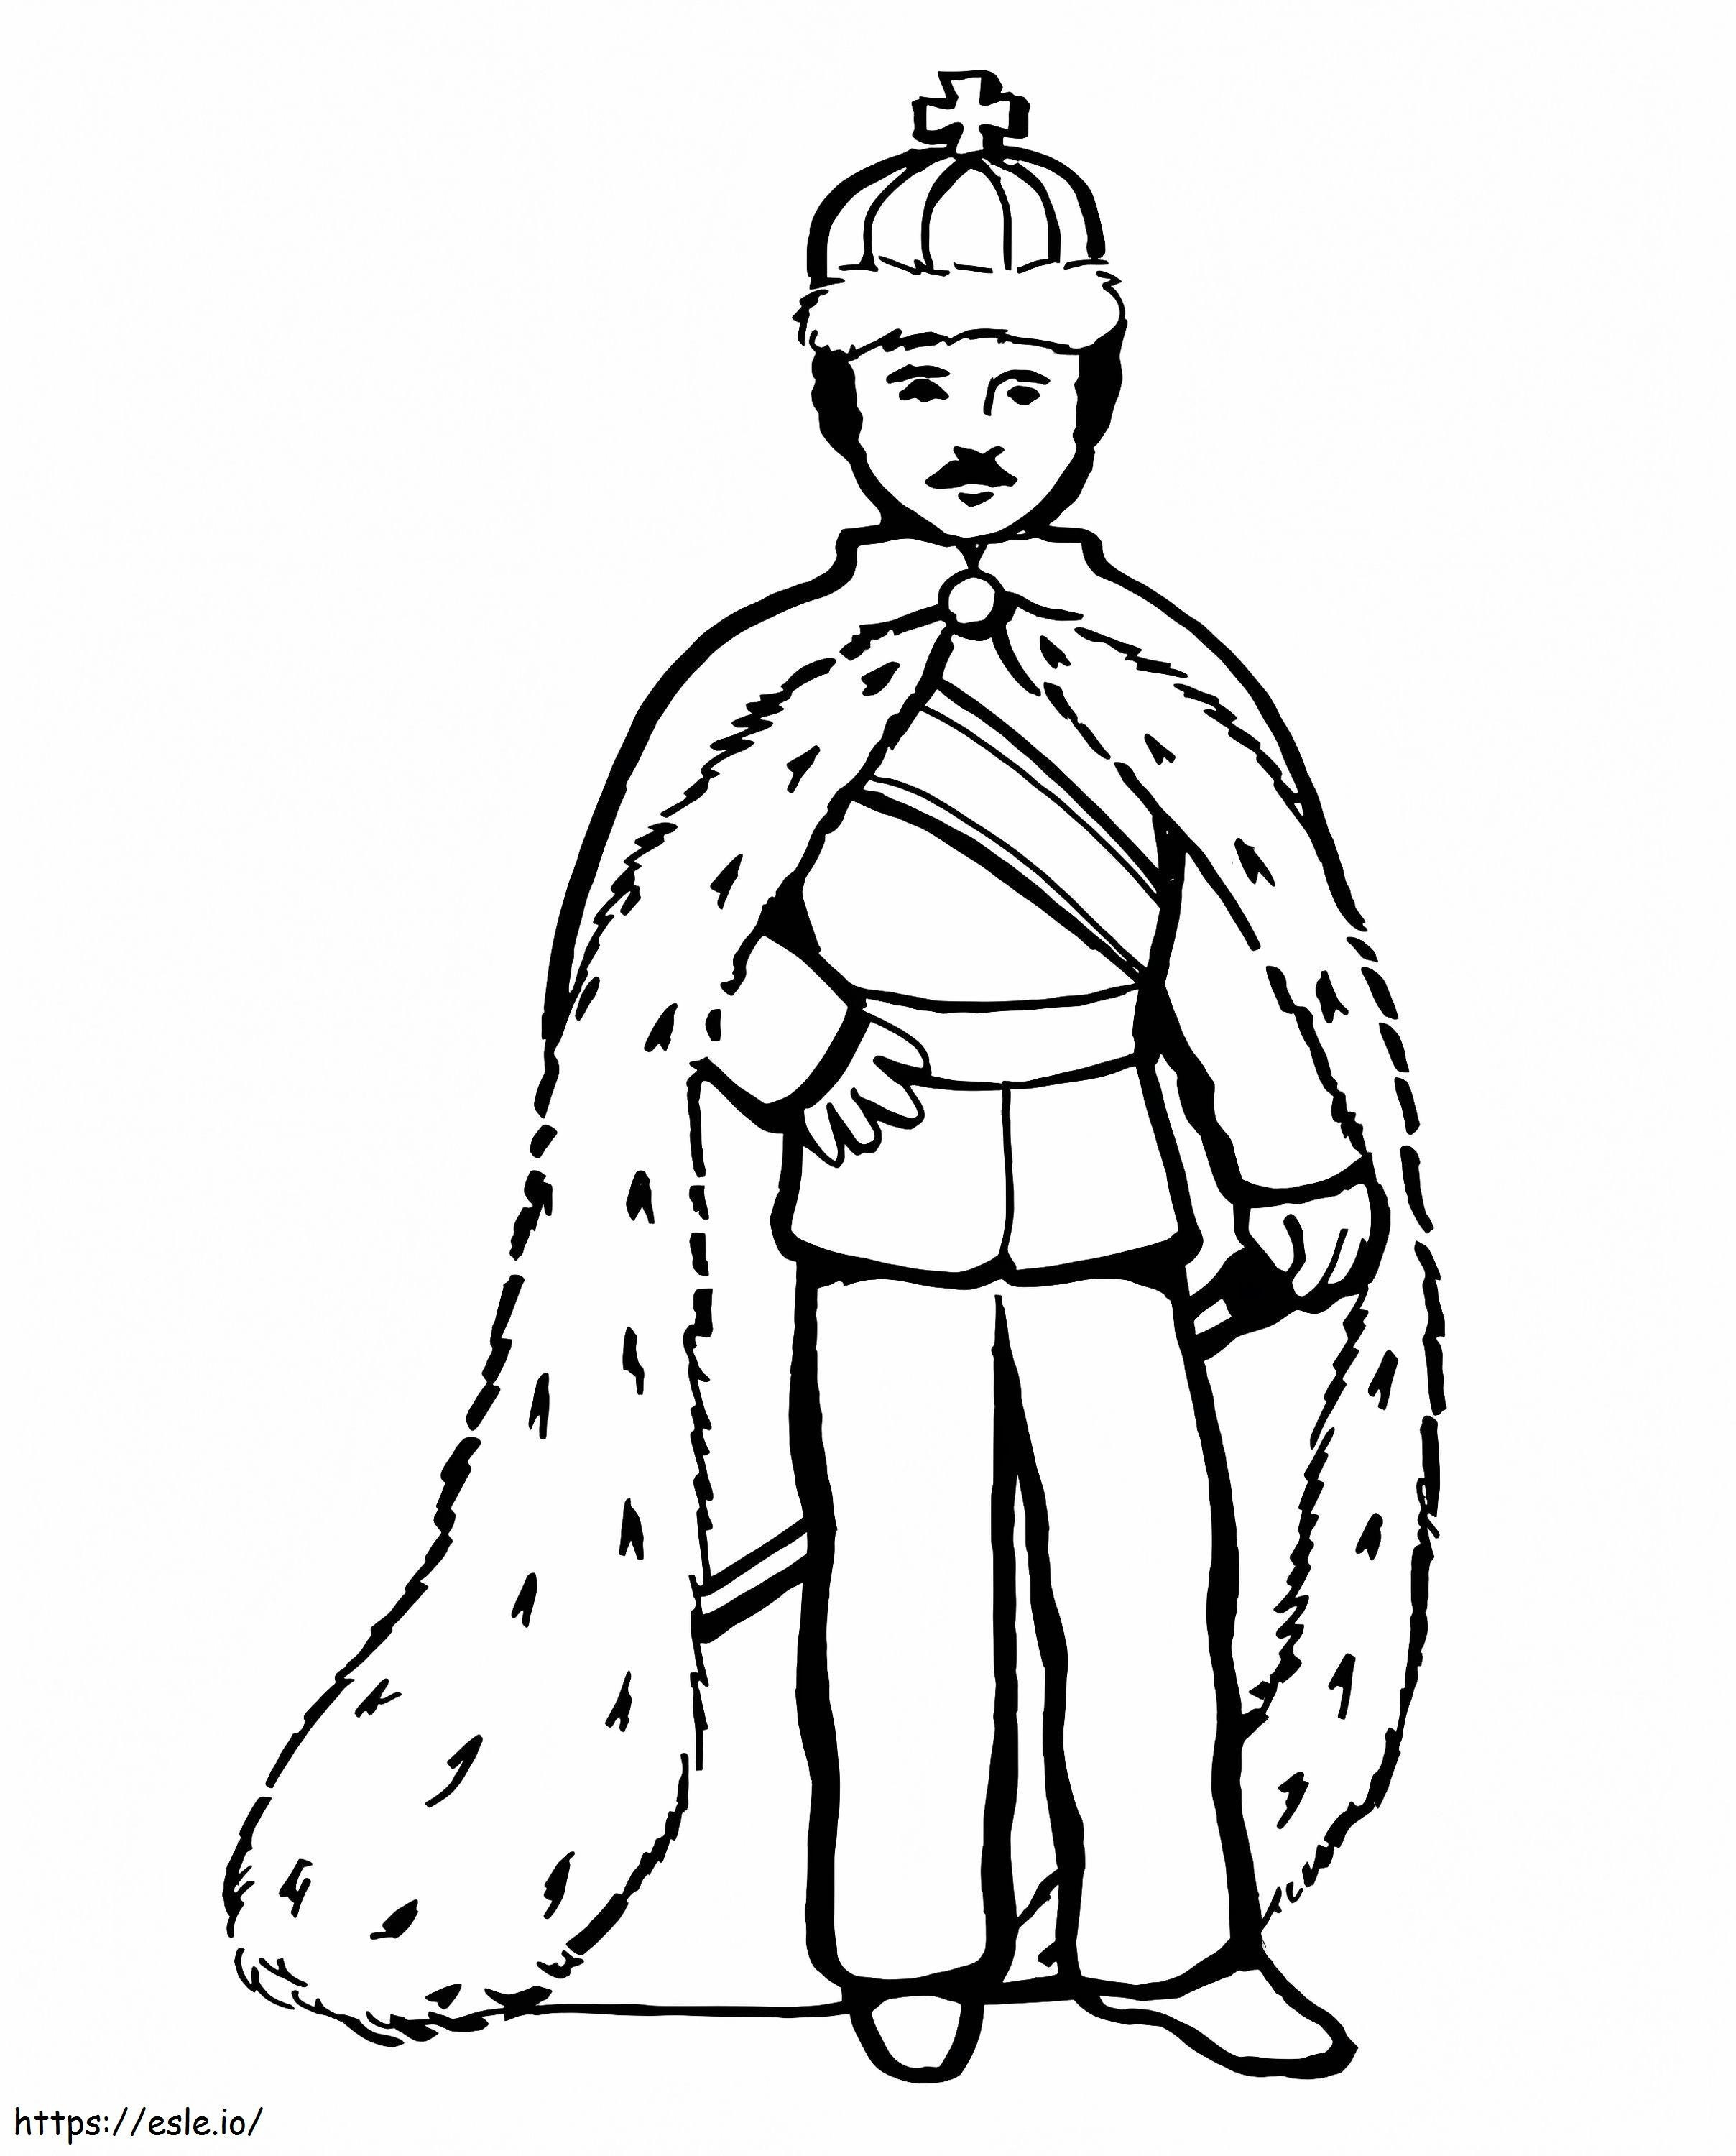 Normal King coloring page